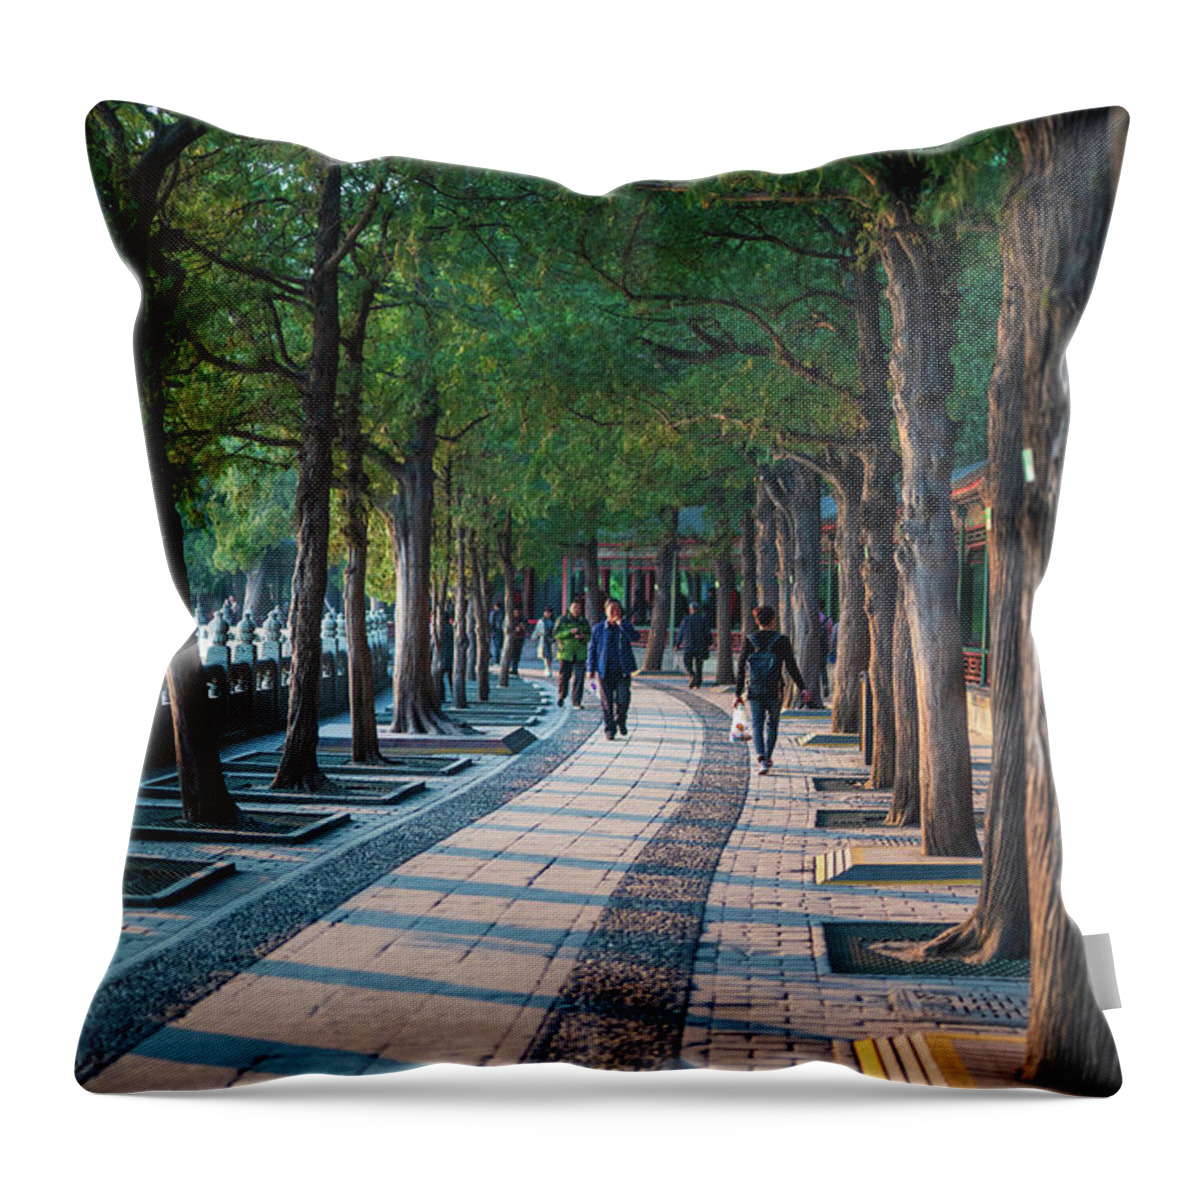 China Throw Pillow featuring the photograph Beijing Summer Palace Afternoon Shadows by Mike Reid